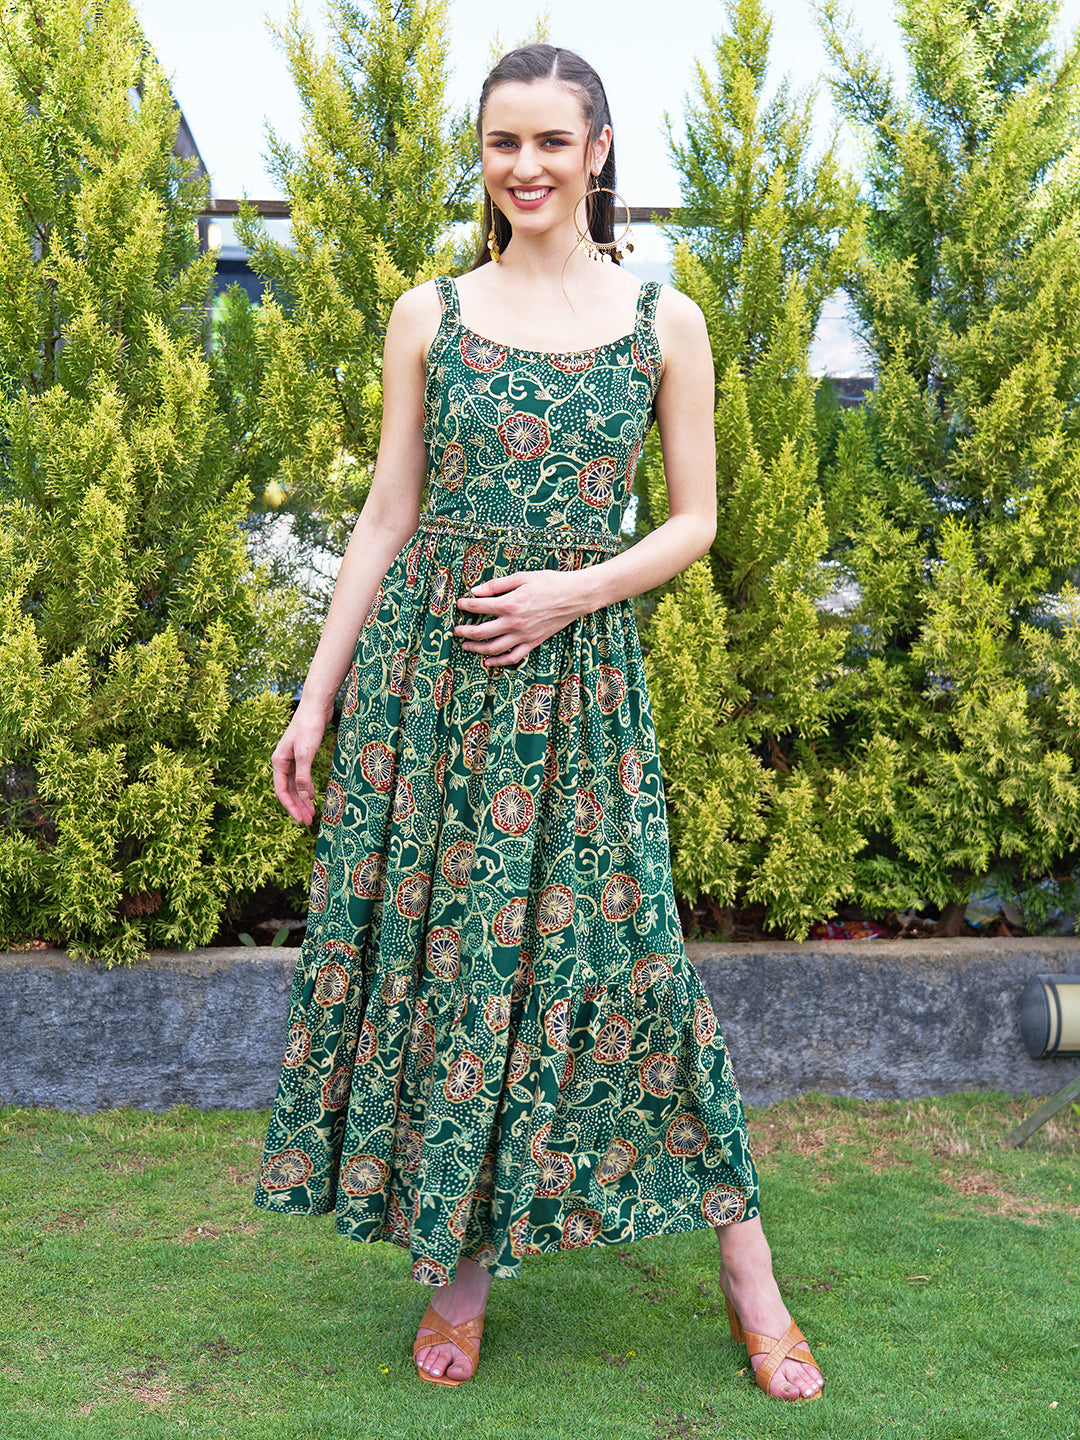 Floral Printed Mirror & Beads Embroidered Maxi Dress With Embroidered Belt - Green